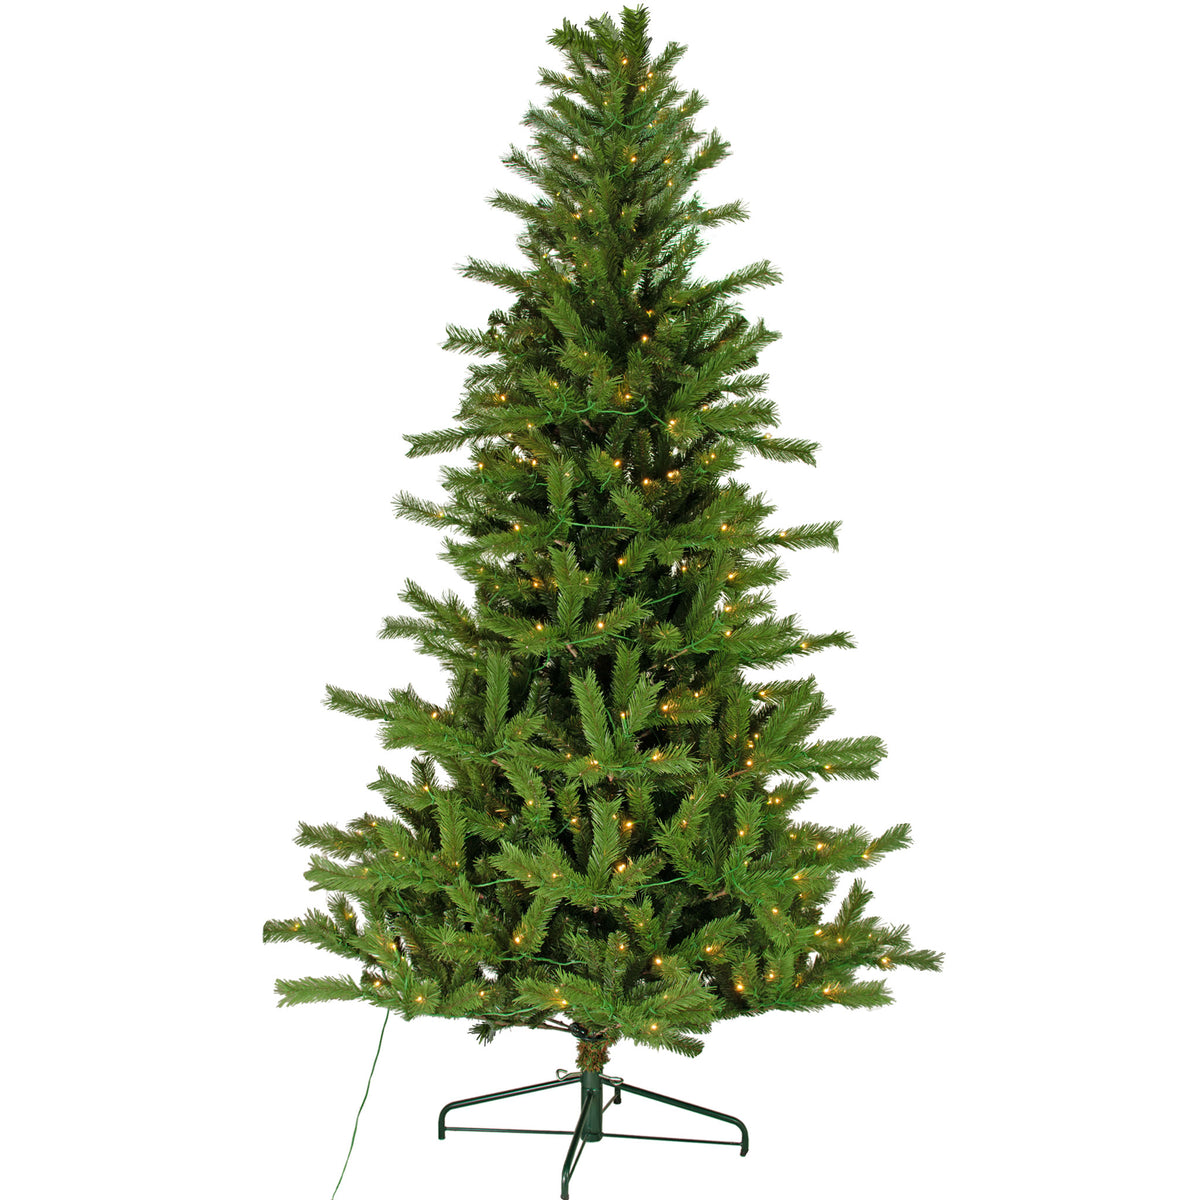 Introducing the Pre-Lit Balsam Fir Tree with LED Lights from our Luxe Christmas Collection!